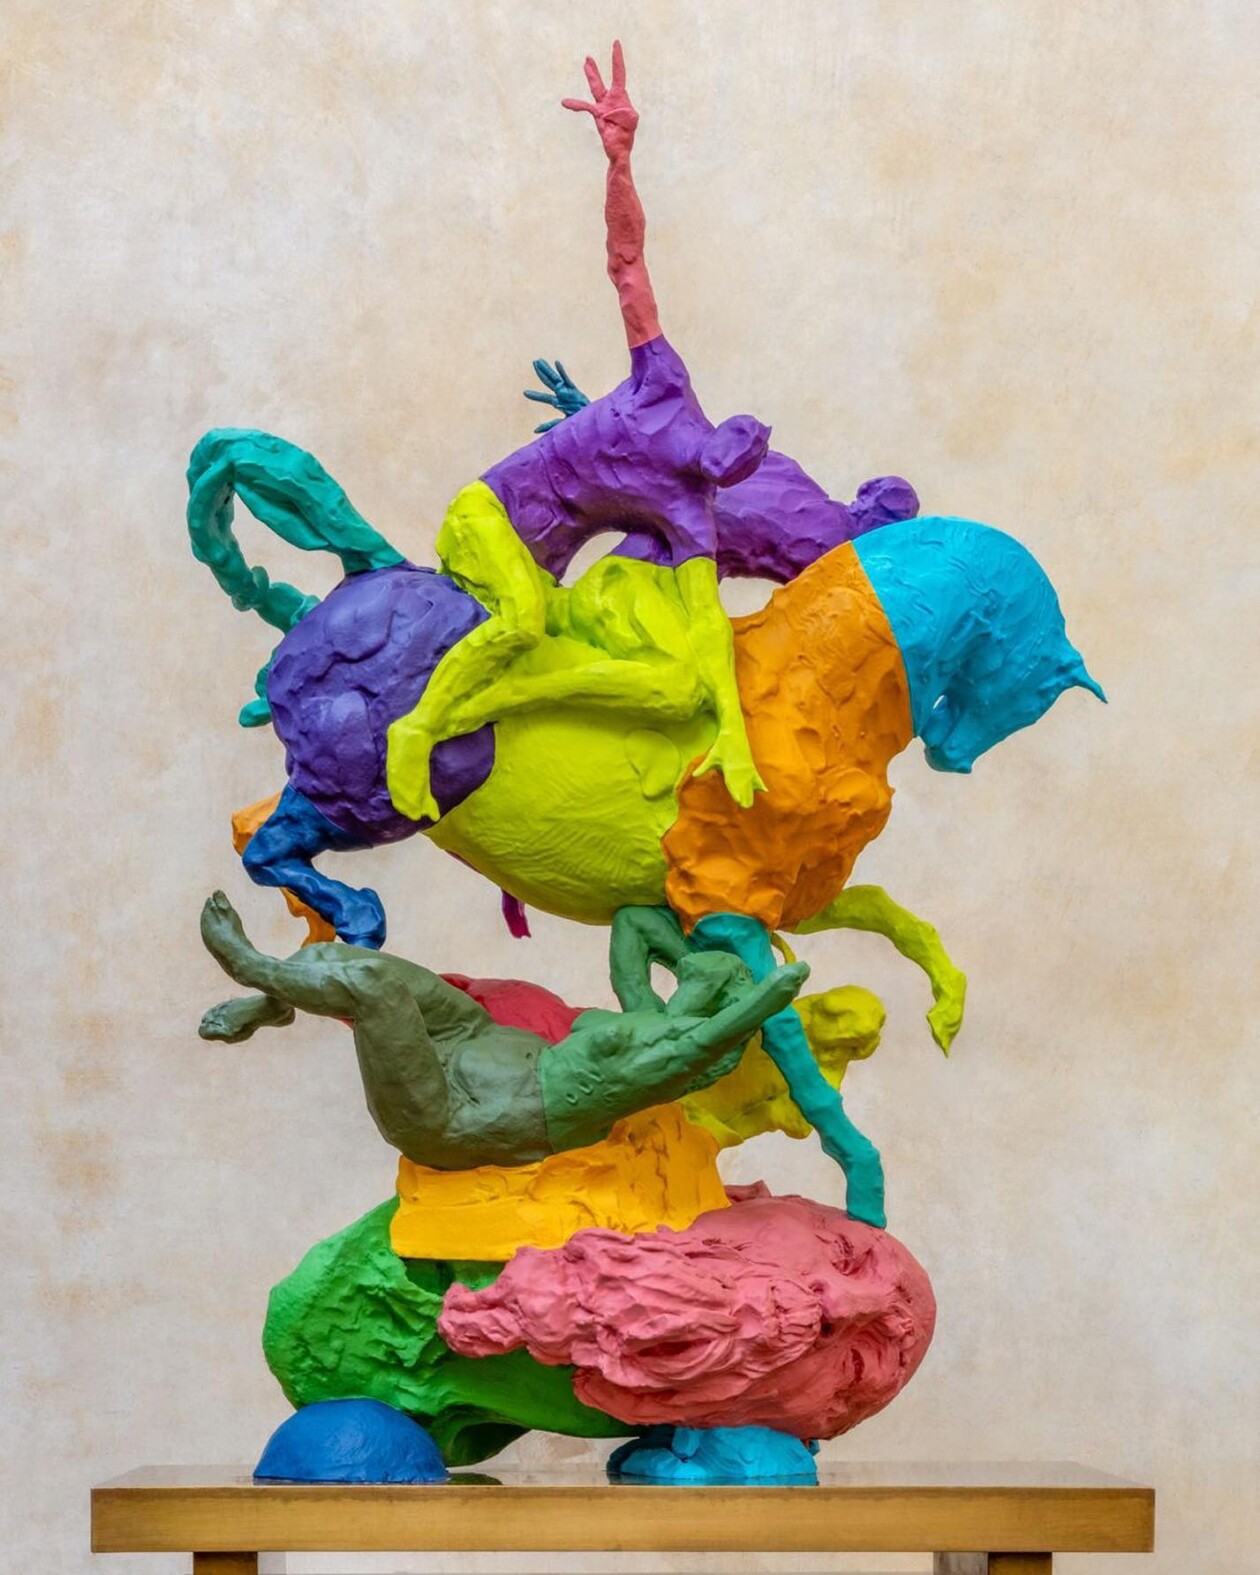 Multicolored 3d Printed Sculptures By Javier Marin (1)